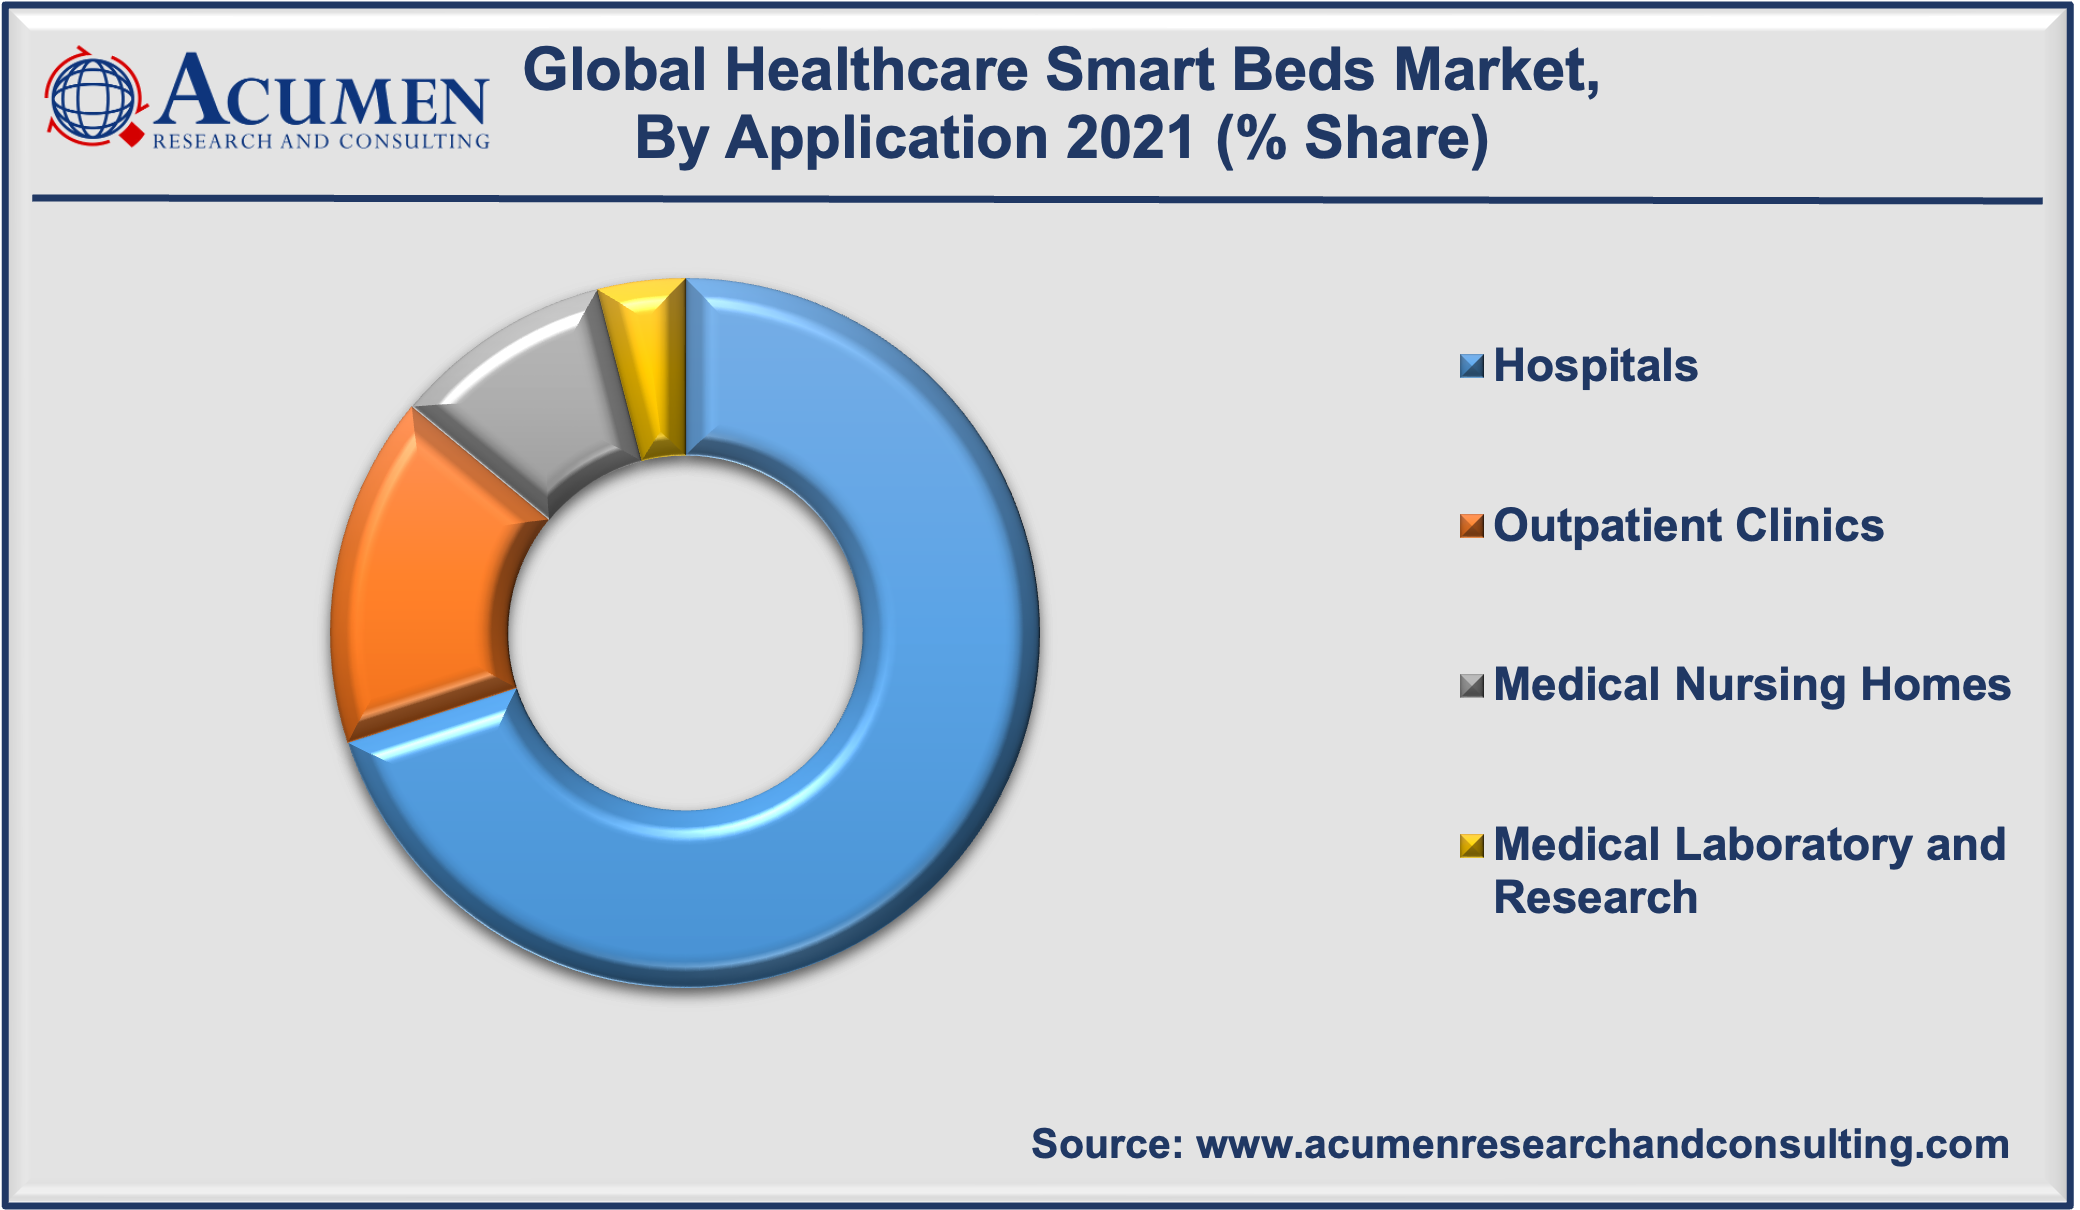 Healthcare Smart Beds Market Share accounted for USD 561 Million in 2021 and is estimated to reach USD 1,166 Million by 2030.